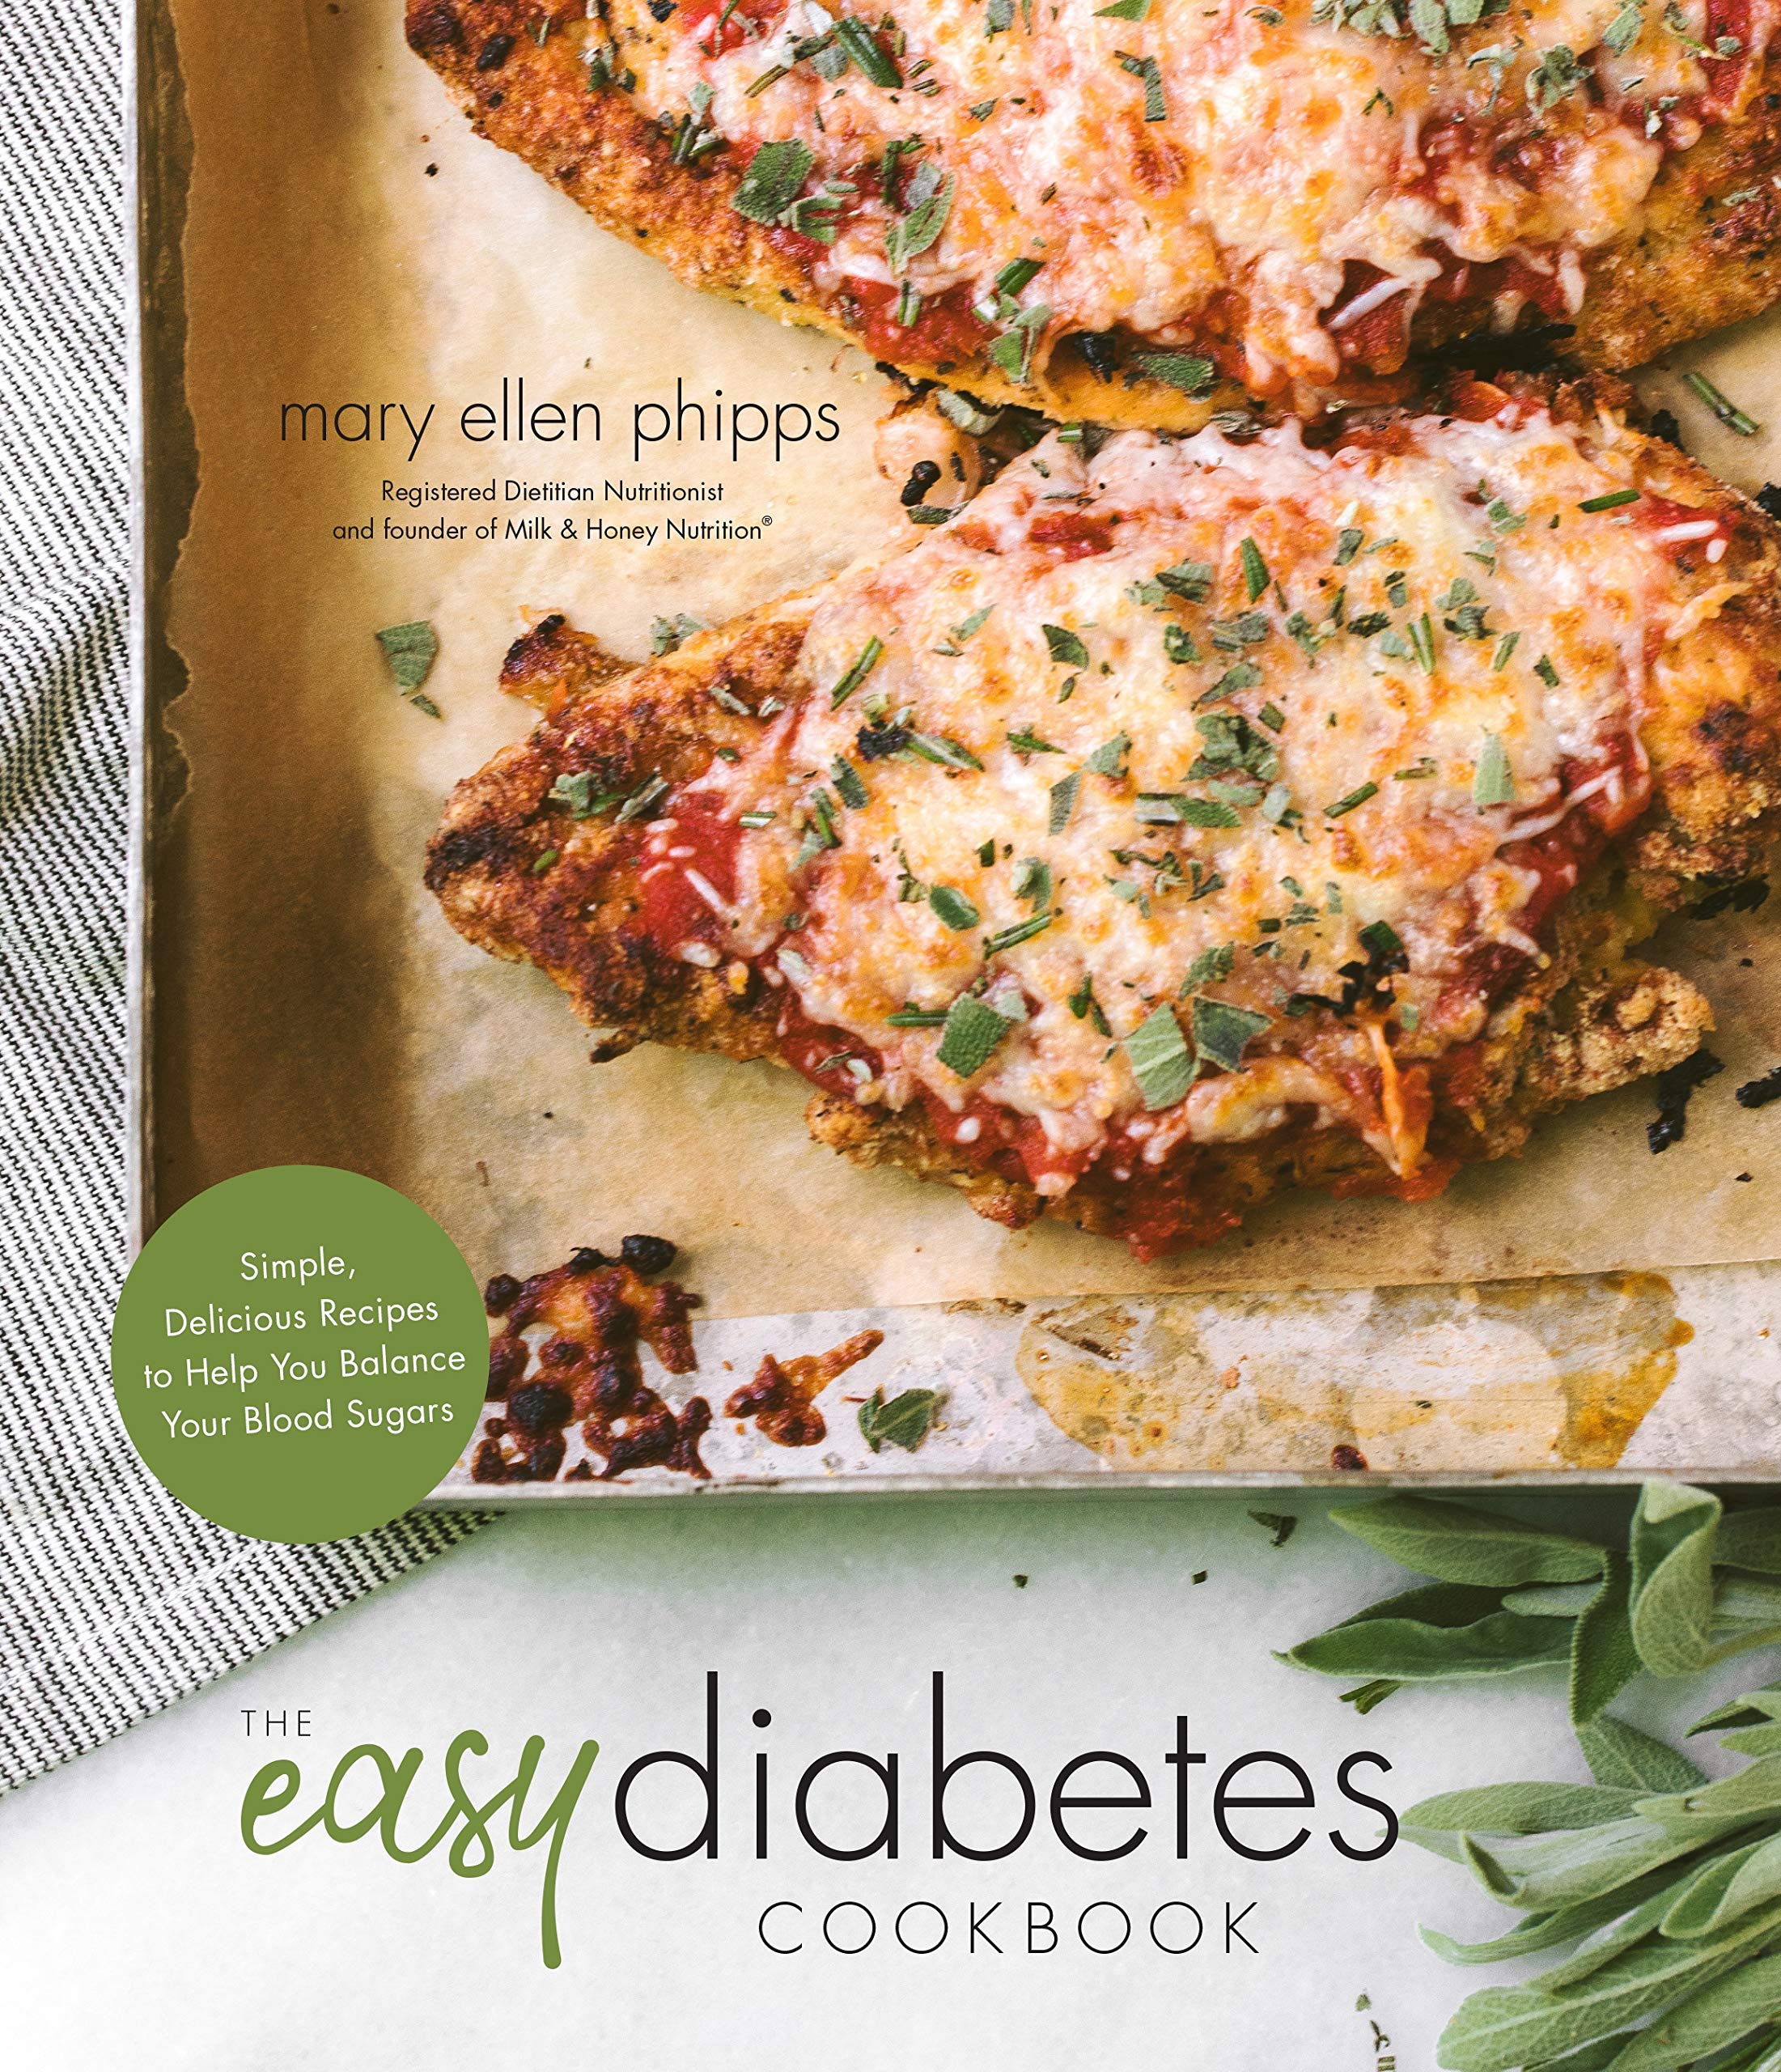 The Easy Diabetes Cookbook: Simple, Delicious Recipes to Help You Balance Your Blood Sugars (Mary Ellen Phipps)